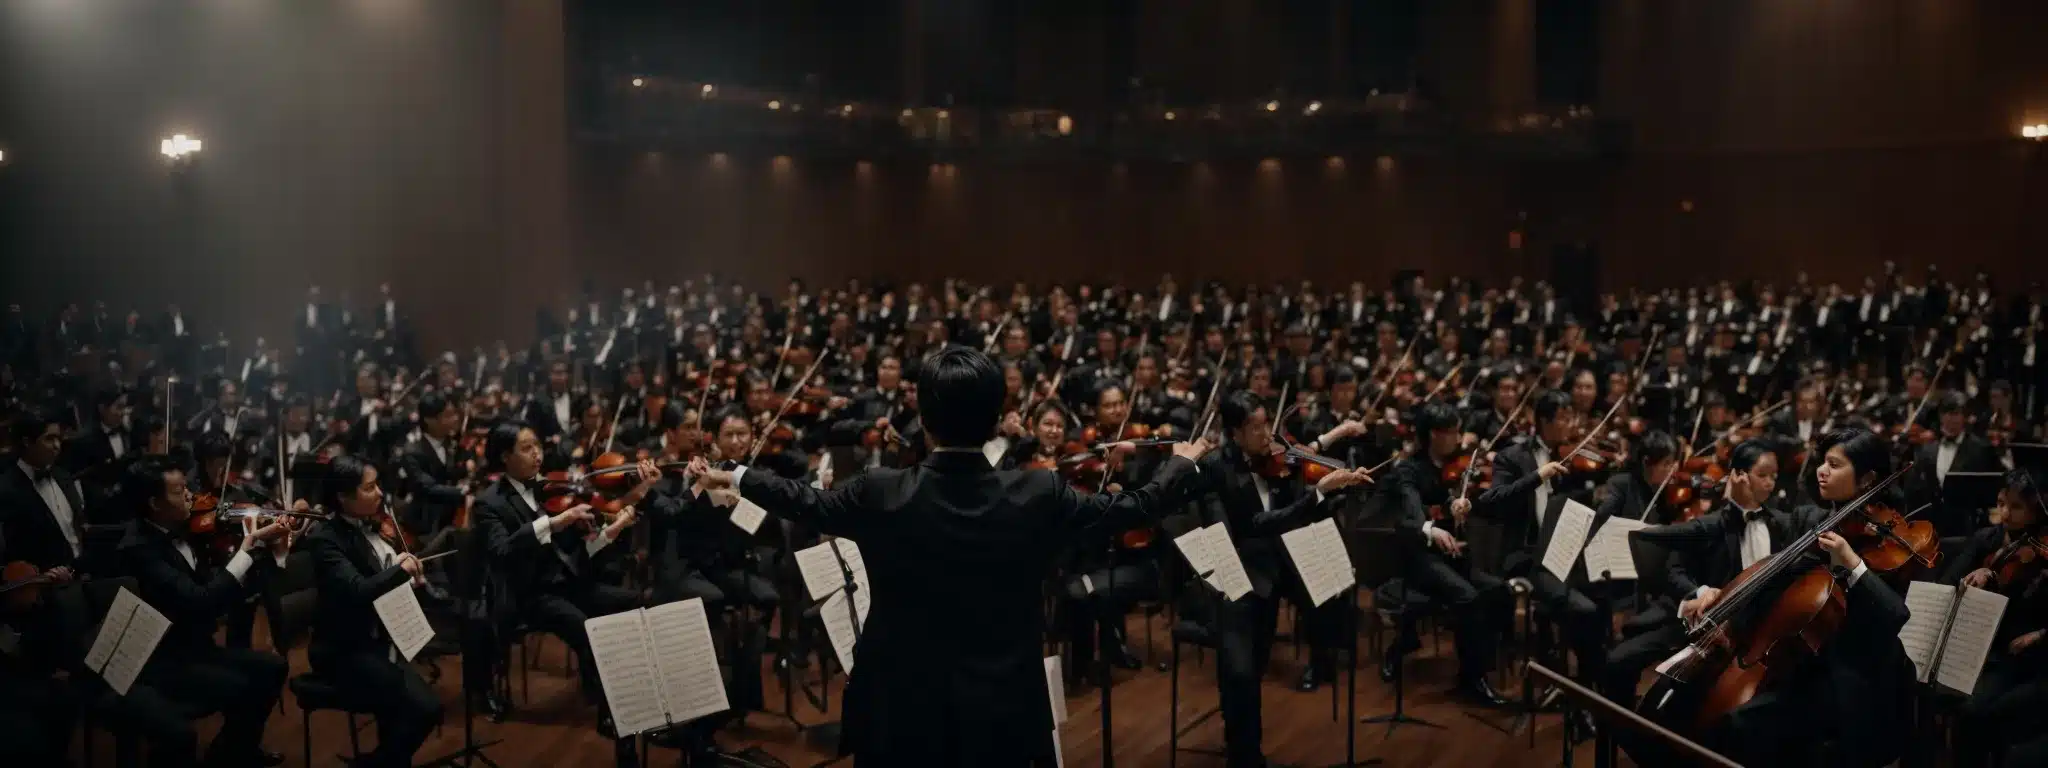 A Conductor Leading A Symphony Orchestra, Immersed In The Harmony Of A Grand Performance.